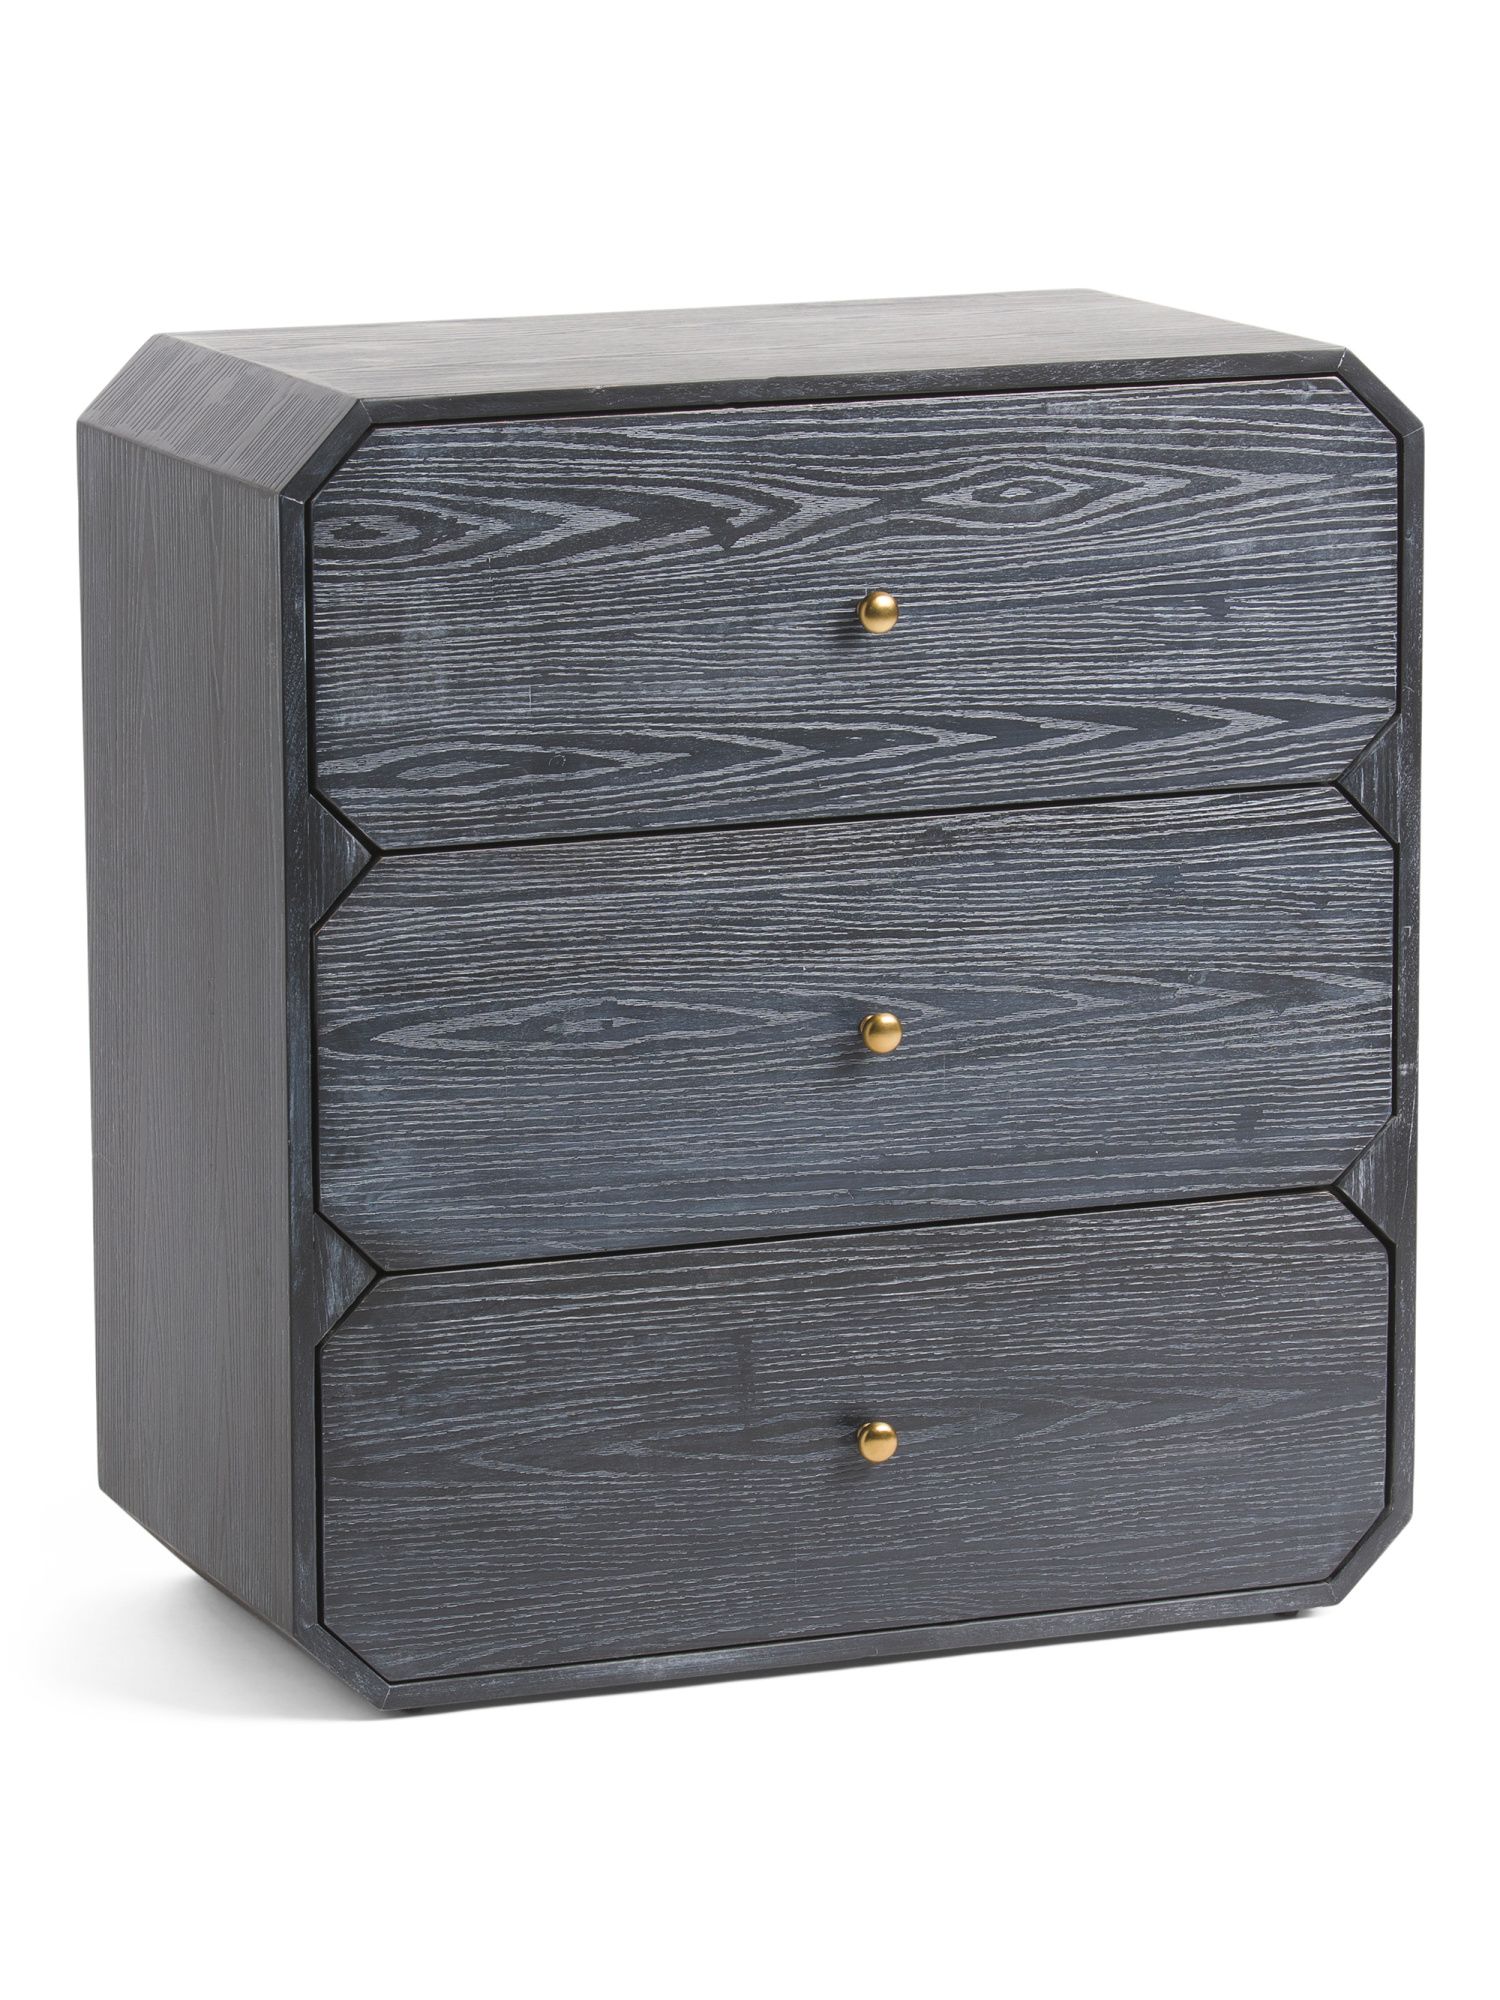 Rounded 3 Drawer Side Table | Marshalls